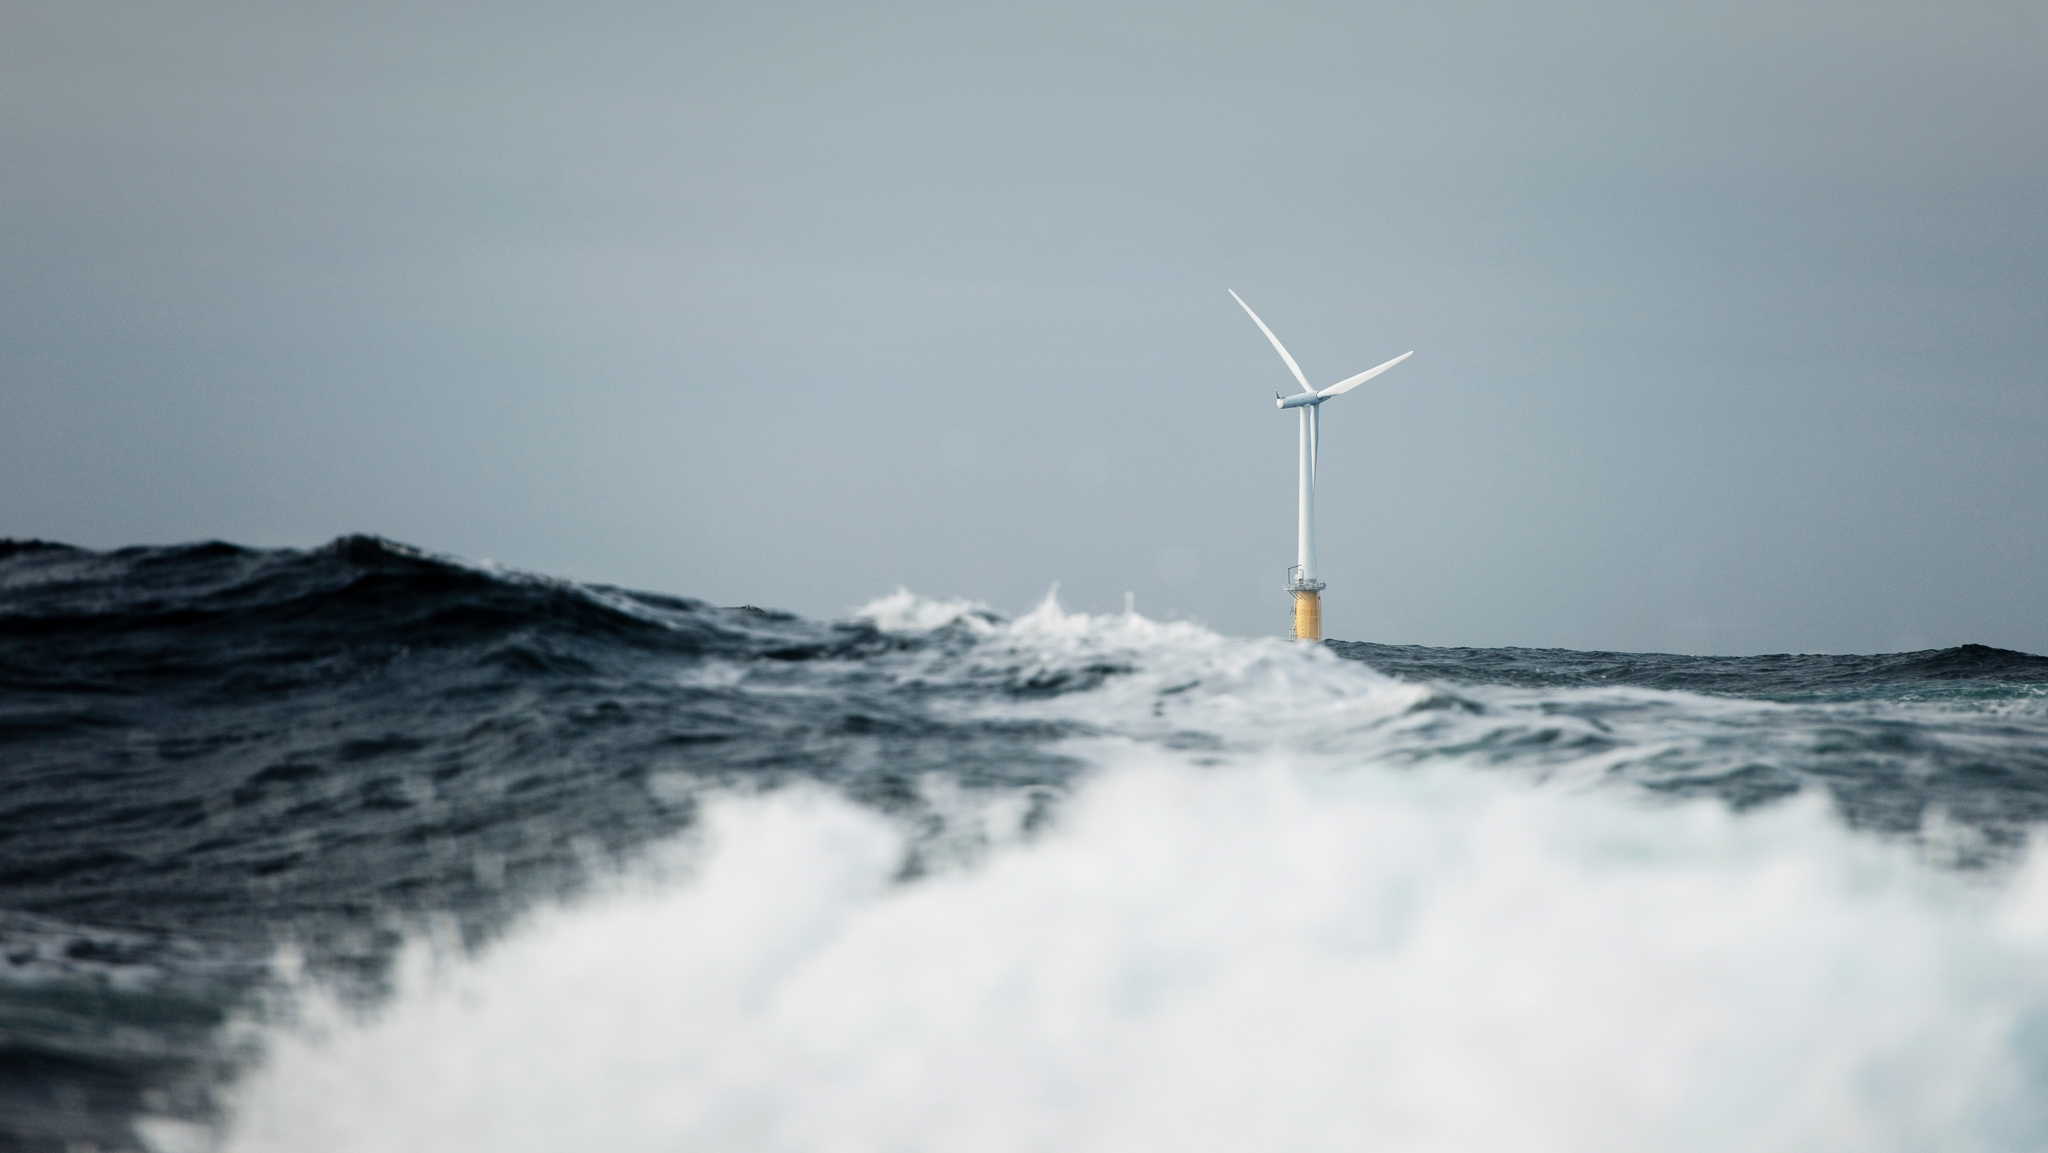 A floating wind turbine out at sea photographed from sea surface level